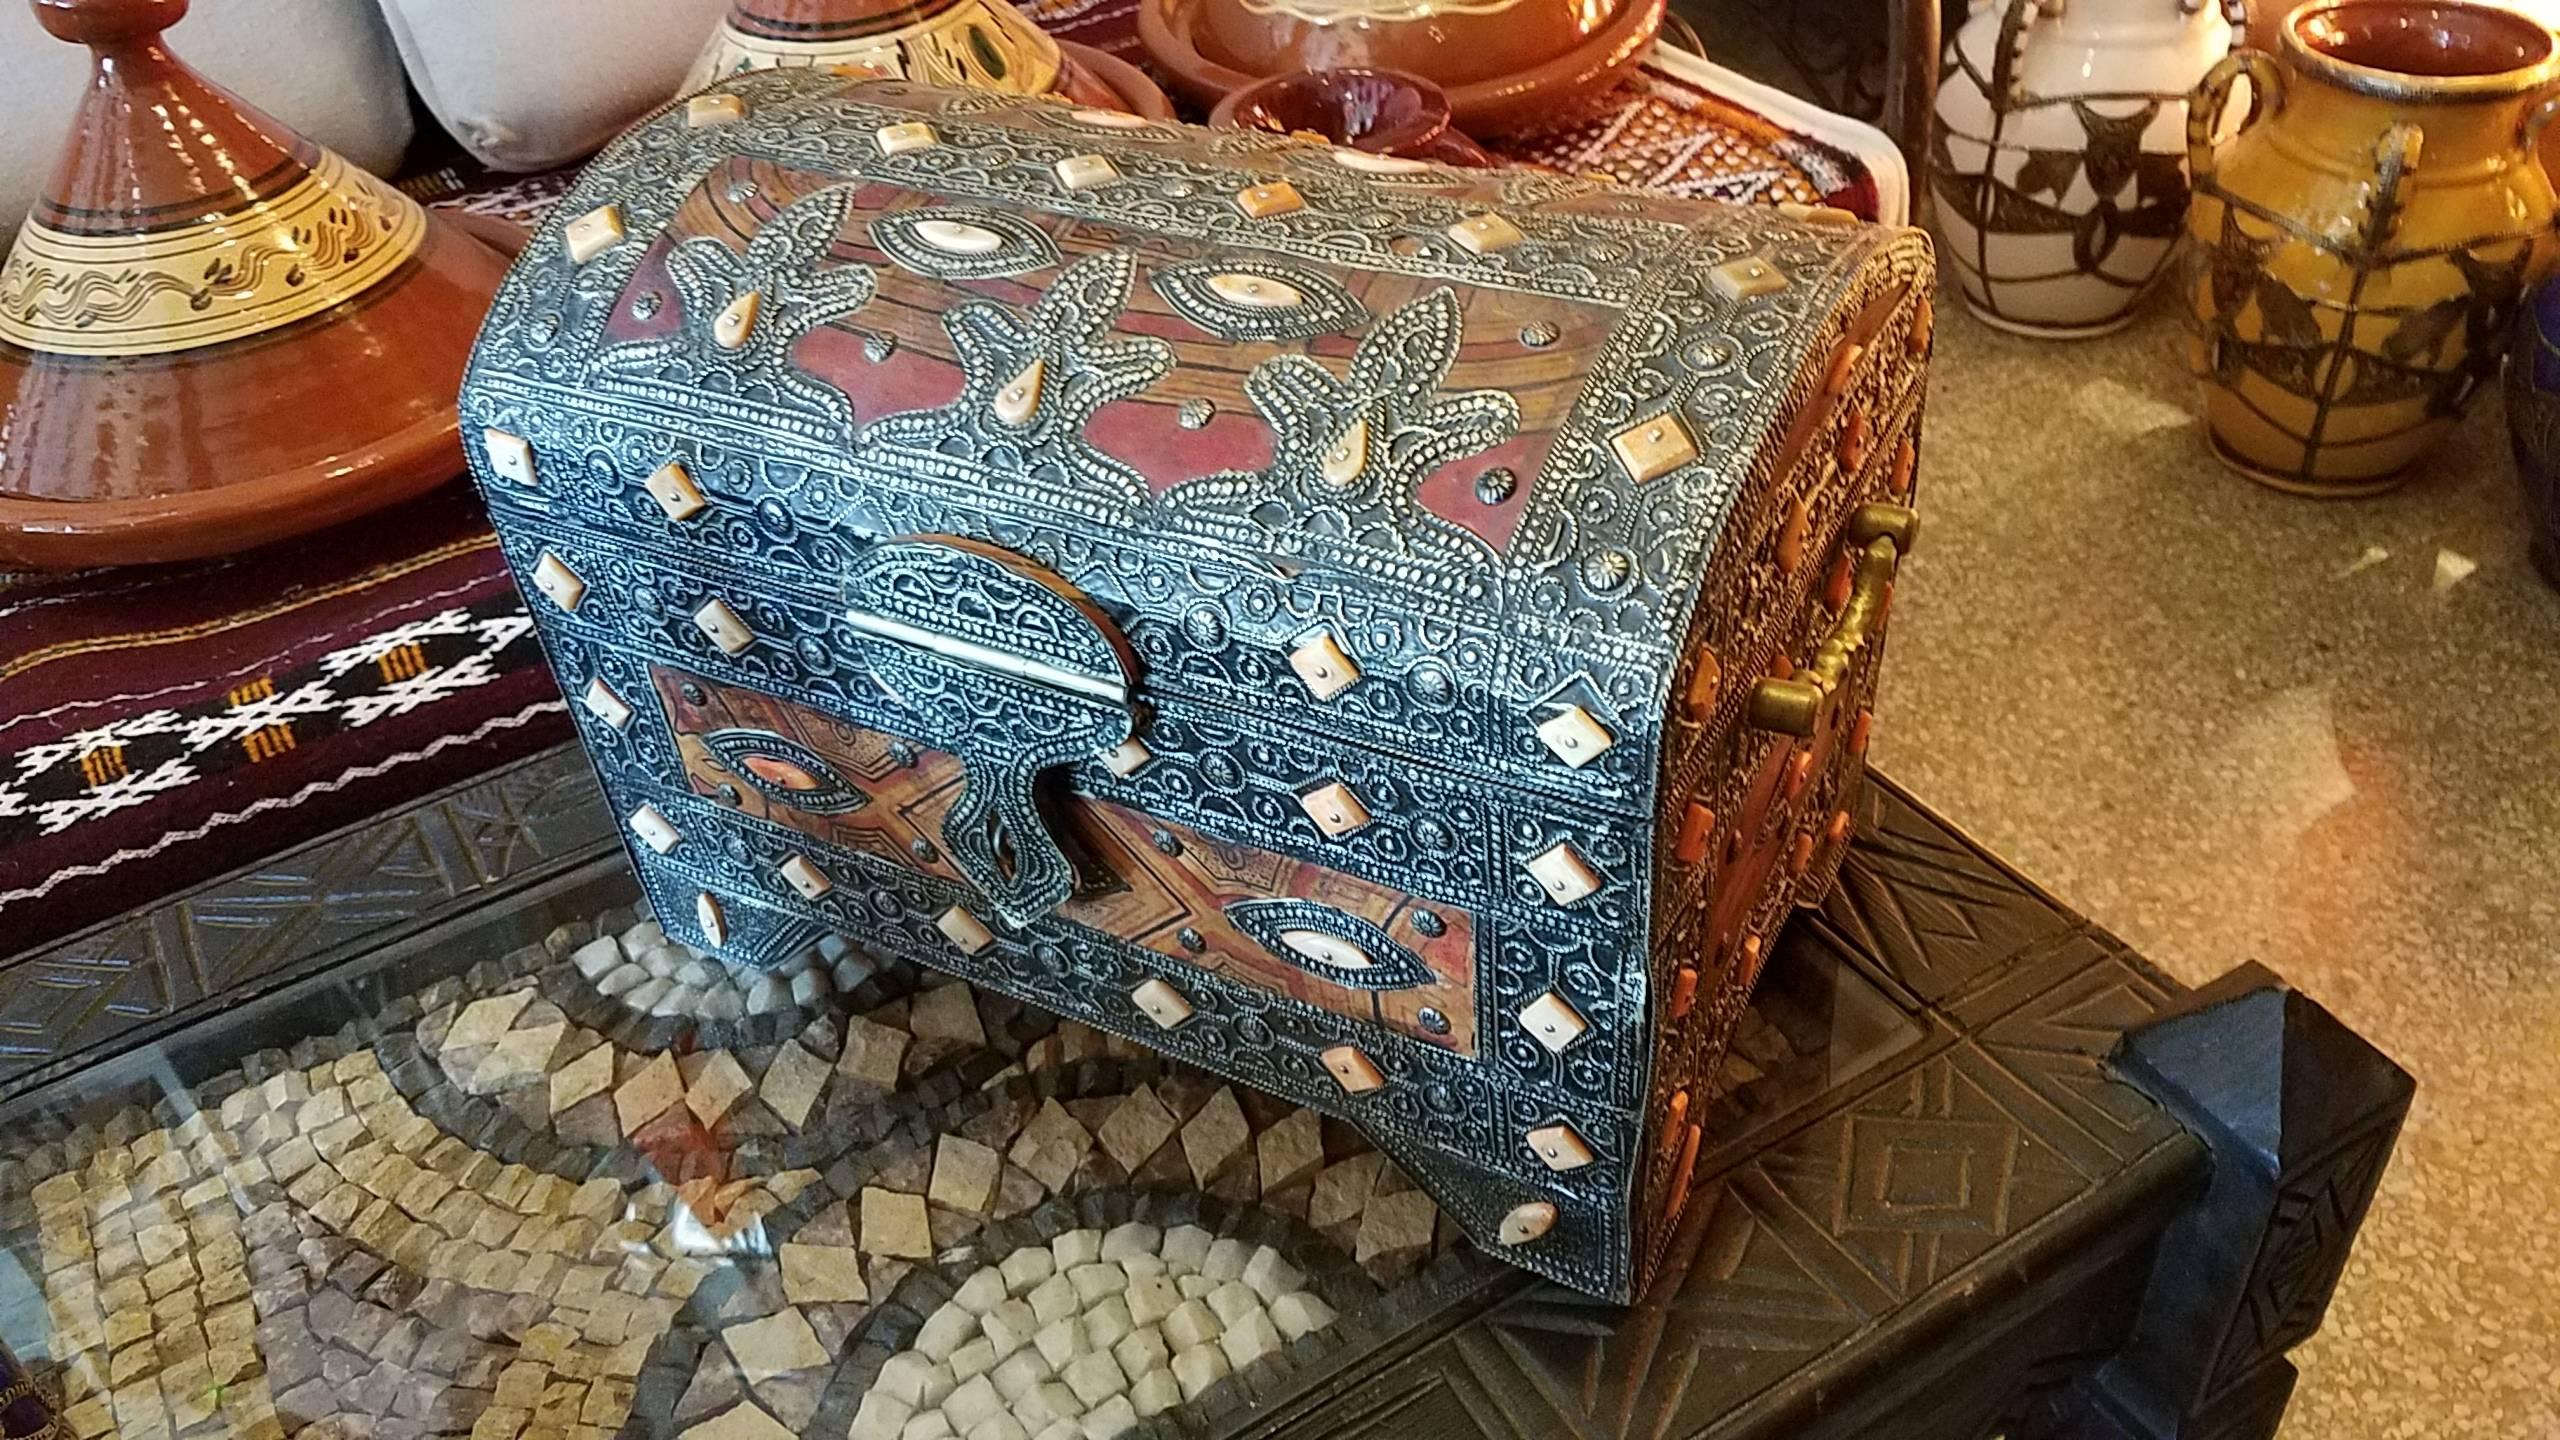 Camel Bone / Metal Inlaid Moroccan Wooden Trunk In Excellent Condition For Sale In Orlando, FL